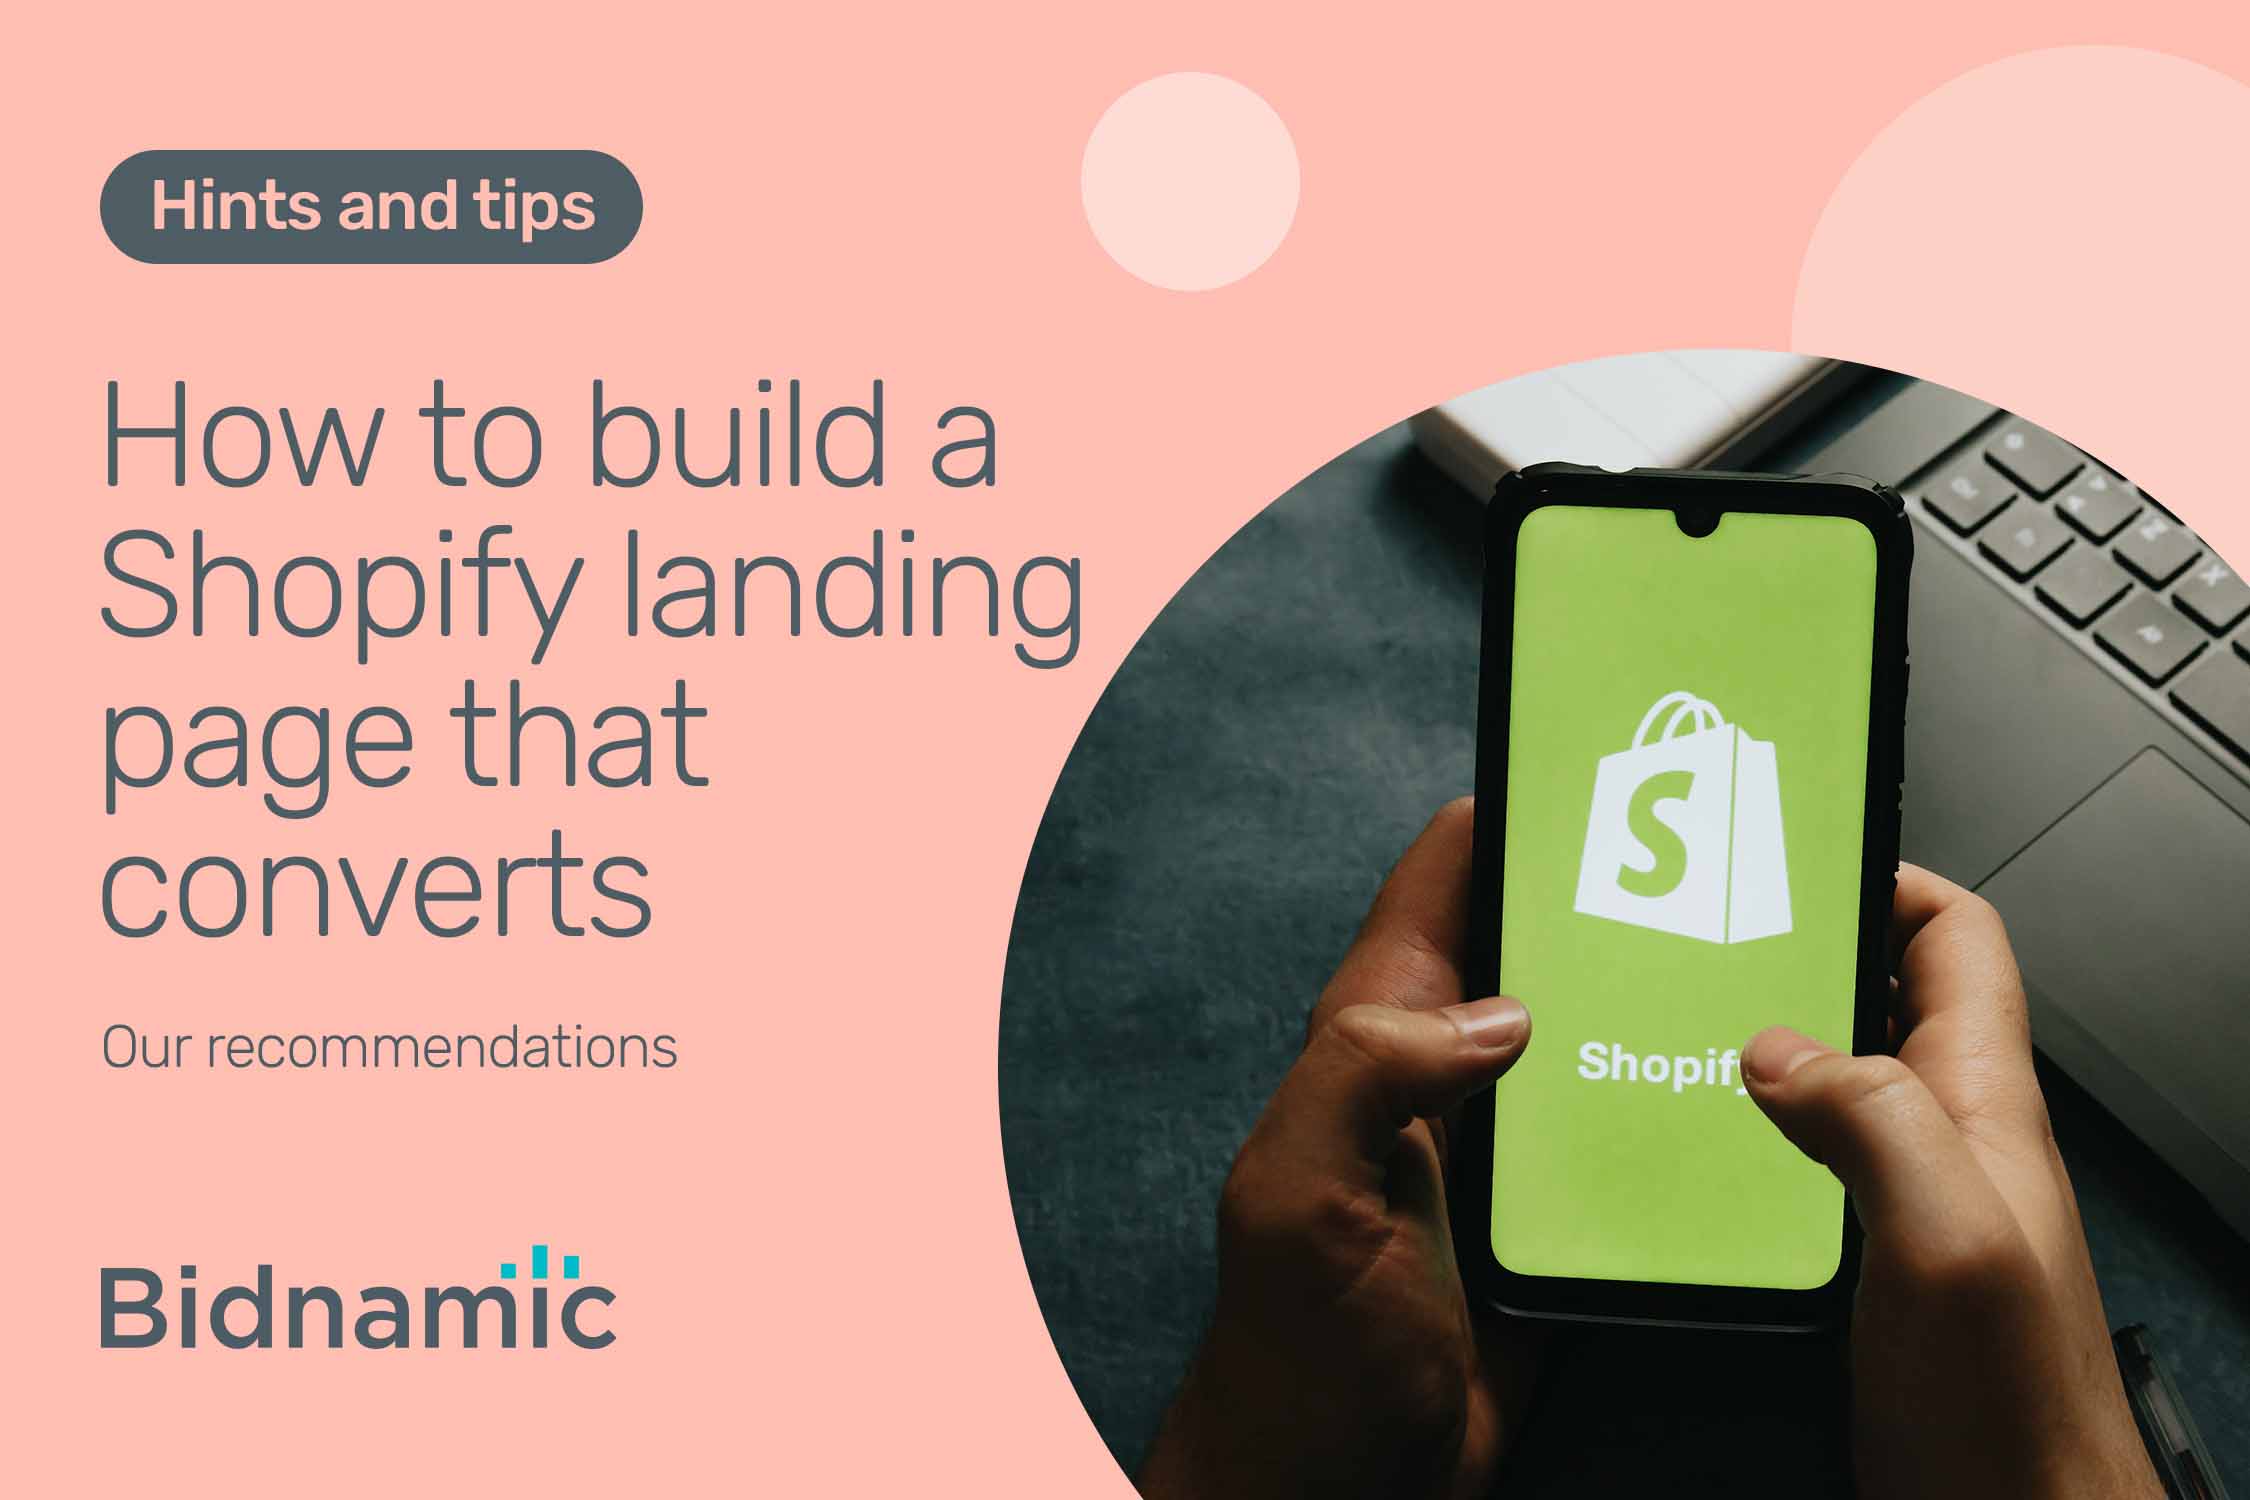 How to build a Shopify landing page that converts